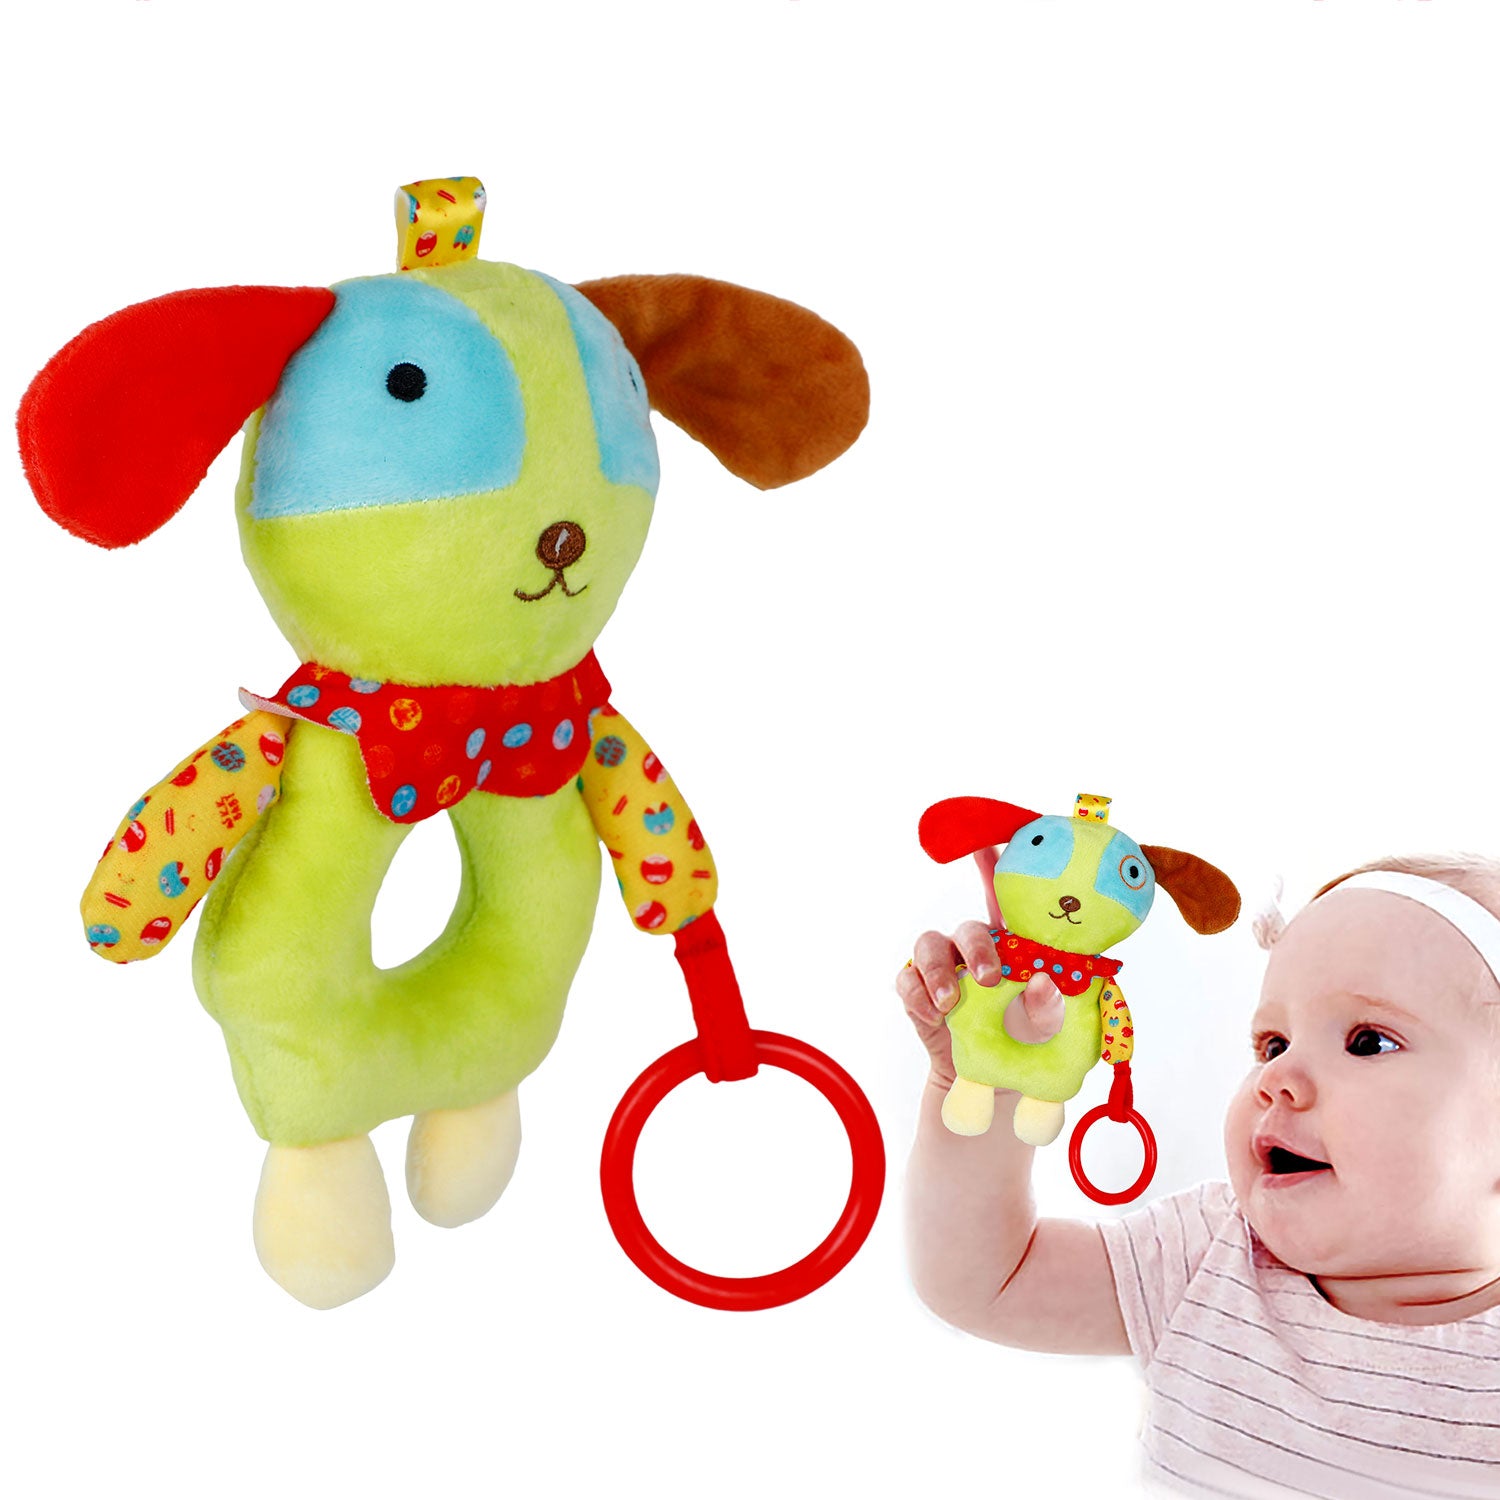 Baby Moo Dog Rustle Paper Handheld Rattle Toy - Green